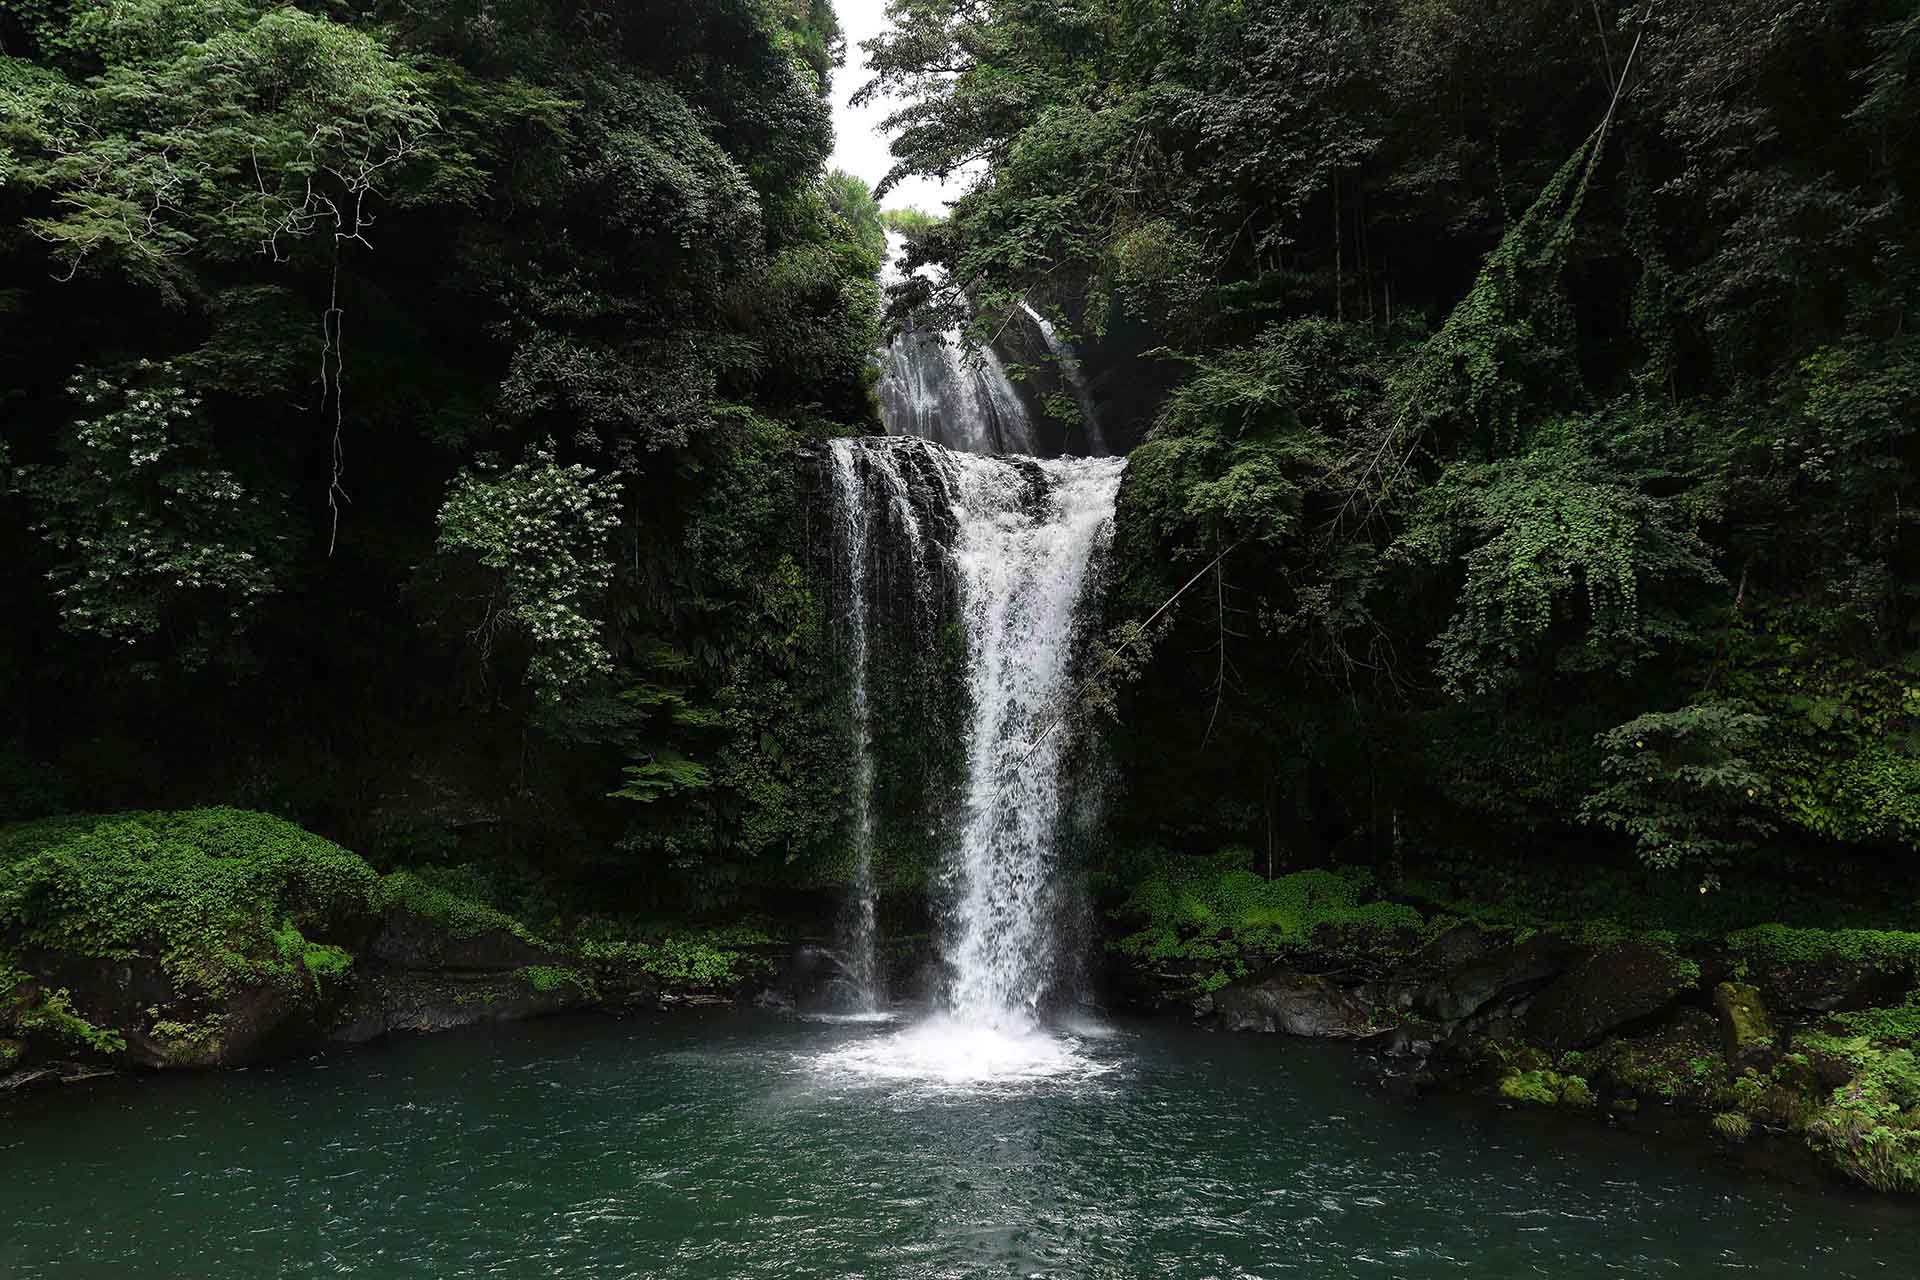 envigorating waterfall in a lush green forest.